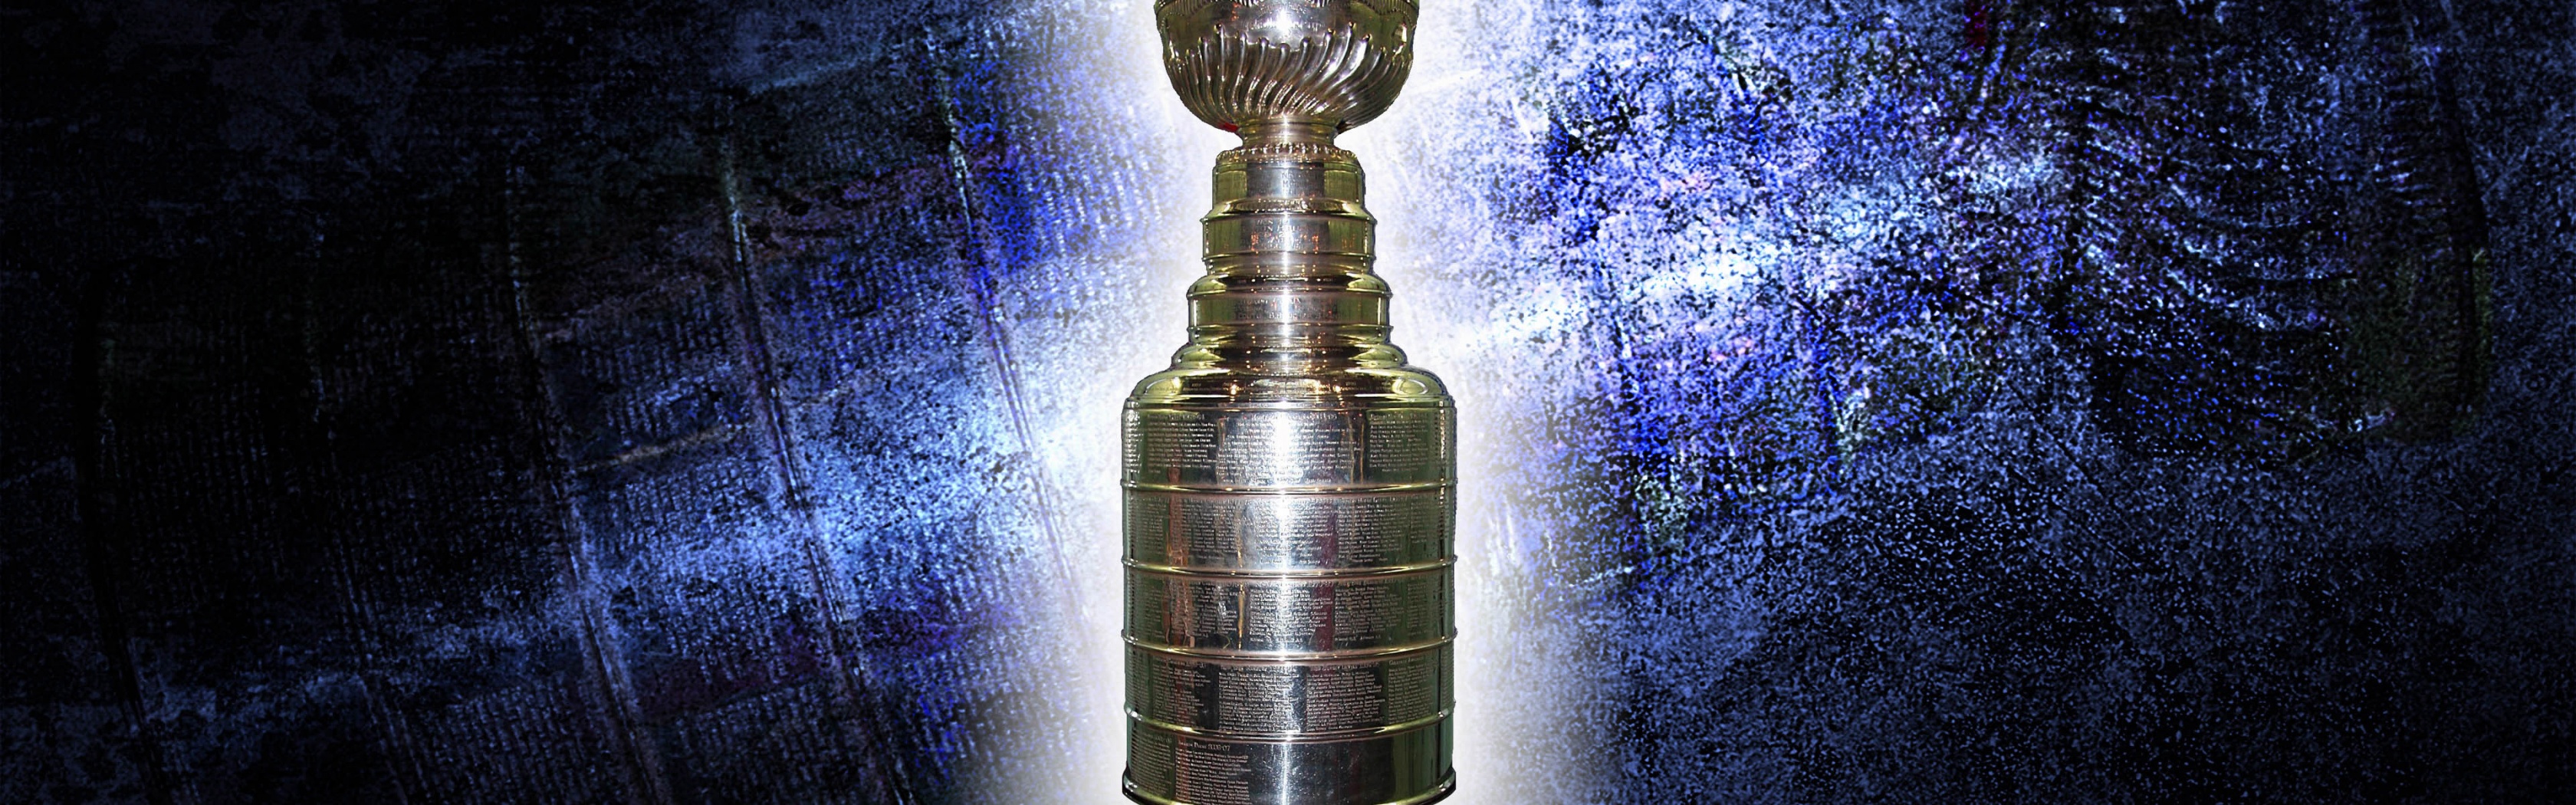 NHL Championship Trophy Stanley Cup